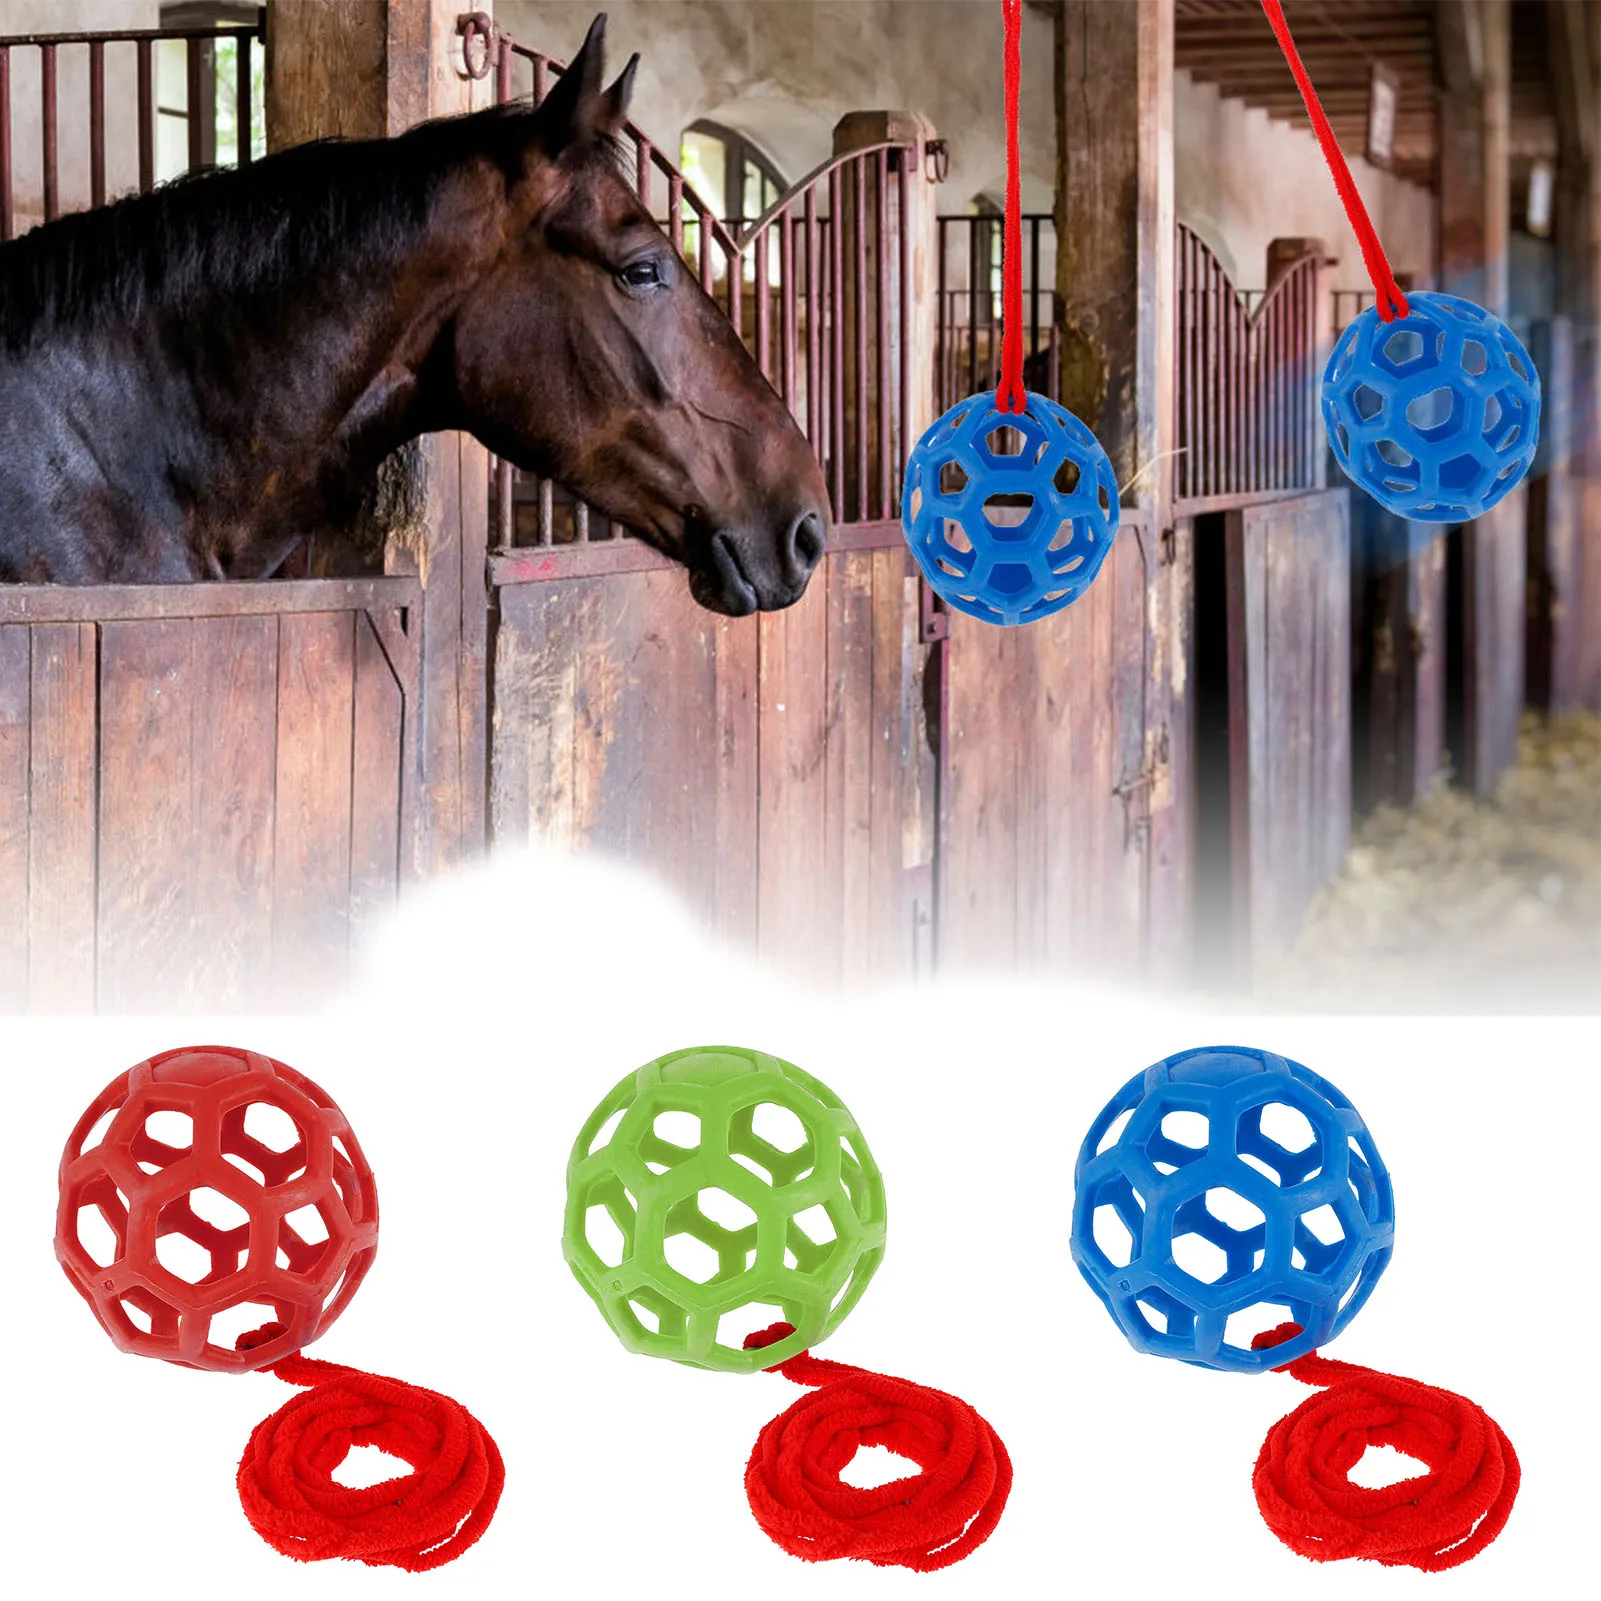 Goat Feeder Ball Hanging Feeding Toy for Horse Goat Sheep Relieve Stress 2PCS Horse Treat Ball Hay Feeder Toy 